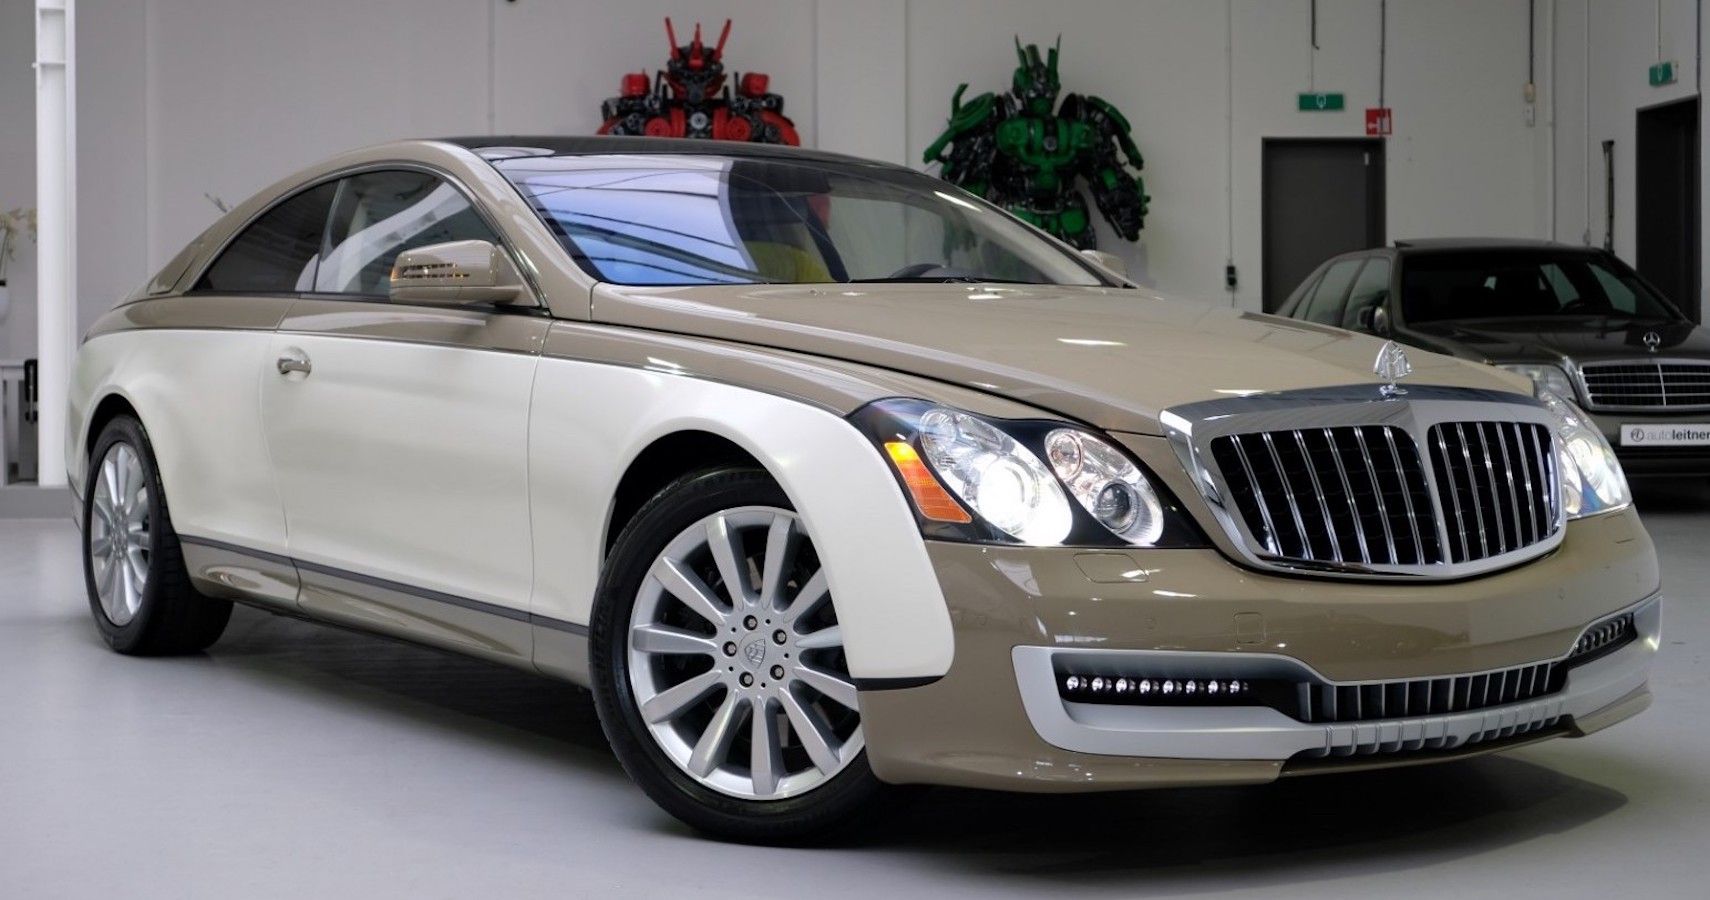 This Former Dictator's Super Exclusive Maybach Could Be Yours For Just $1 Million